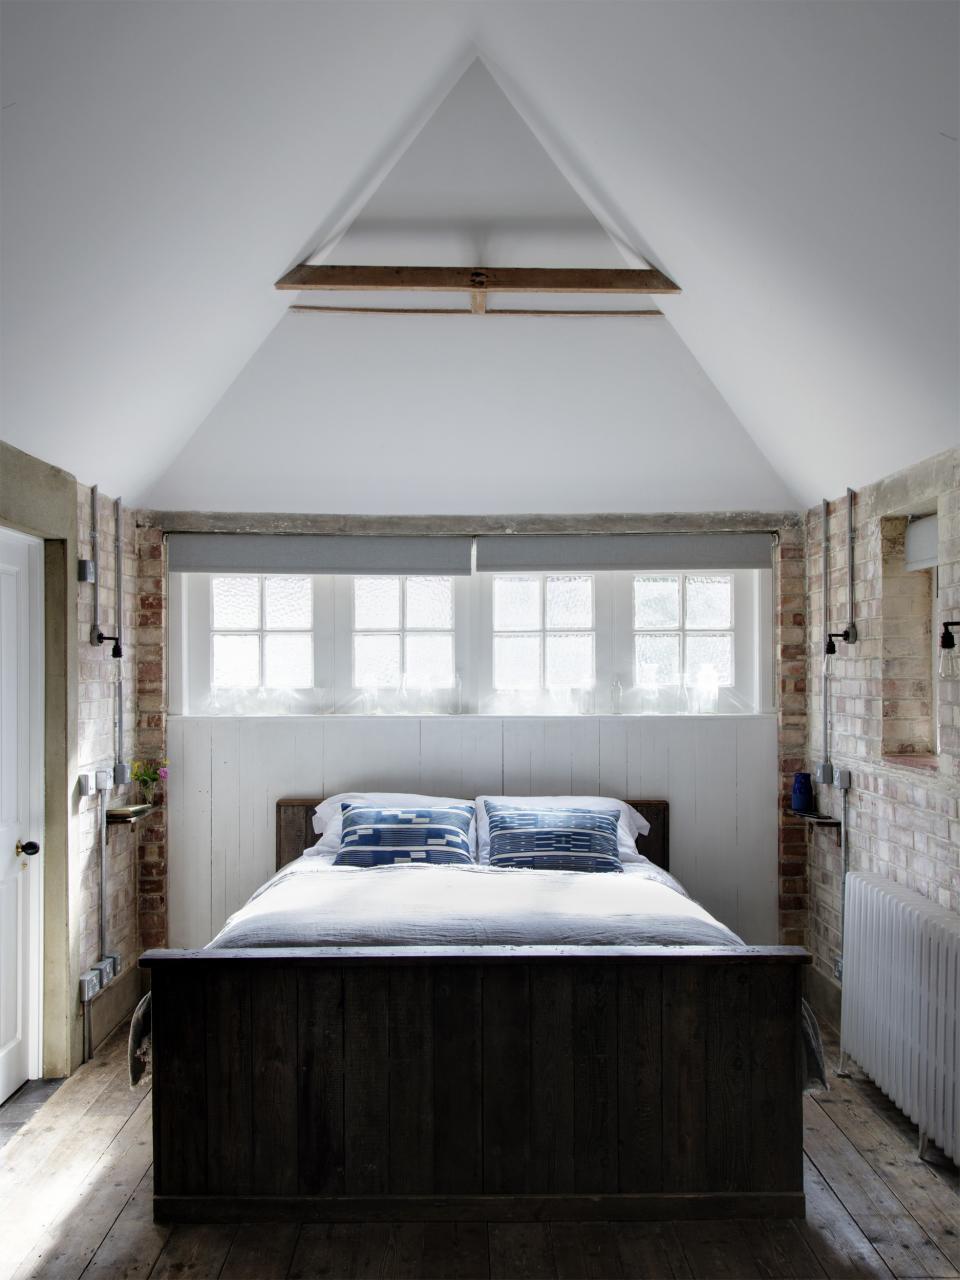 Just wide enough to fit a bed, the former garage looks like an A-frame cabin in the woods from the inside. An added skylight drops a beam of sunlight right on the duvet.